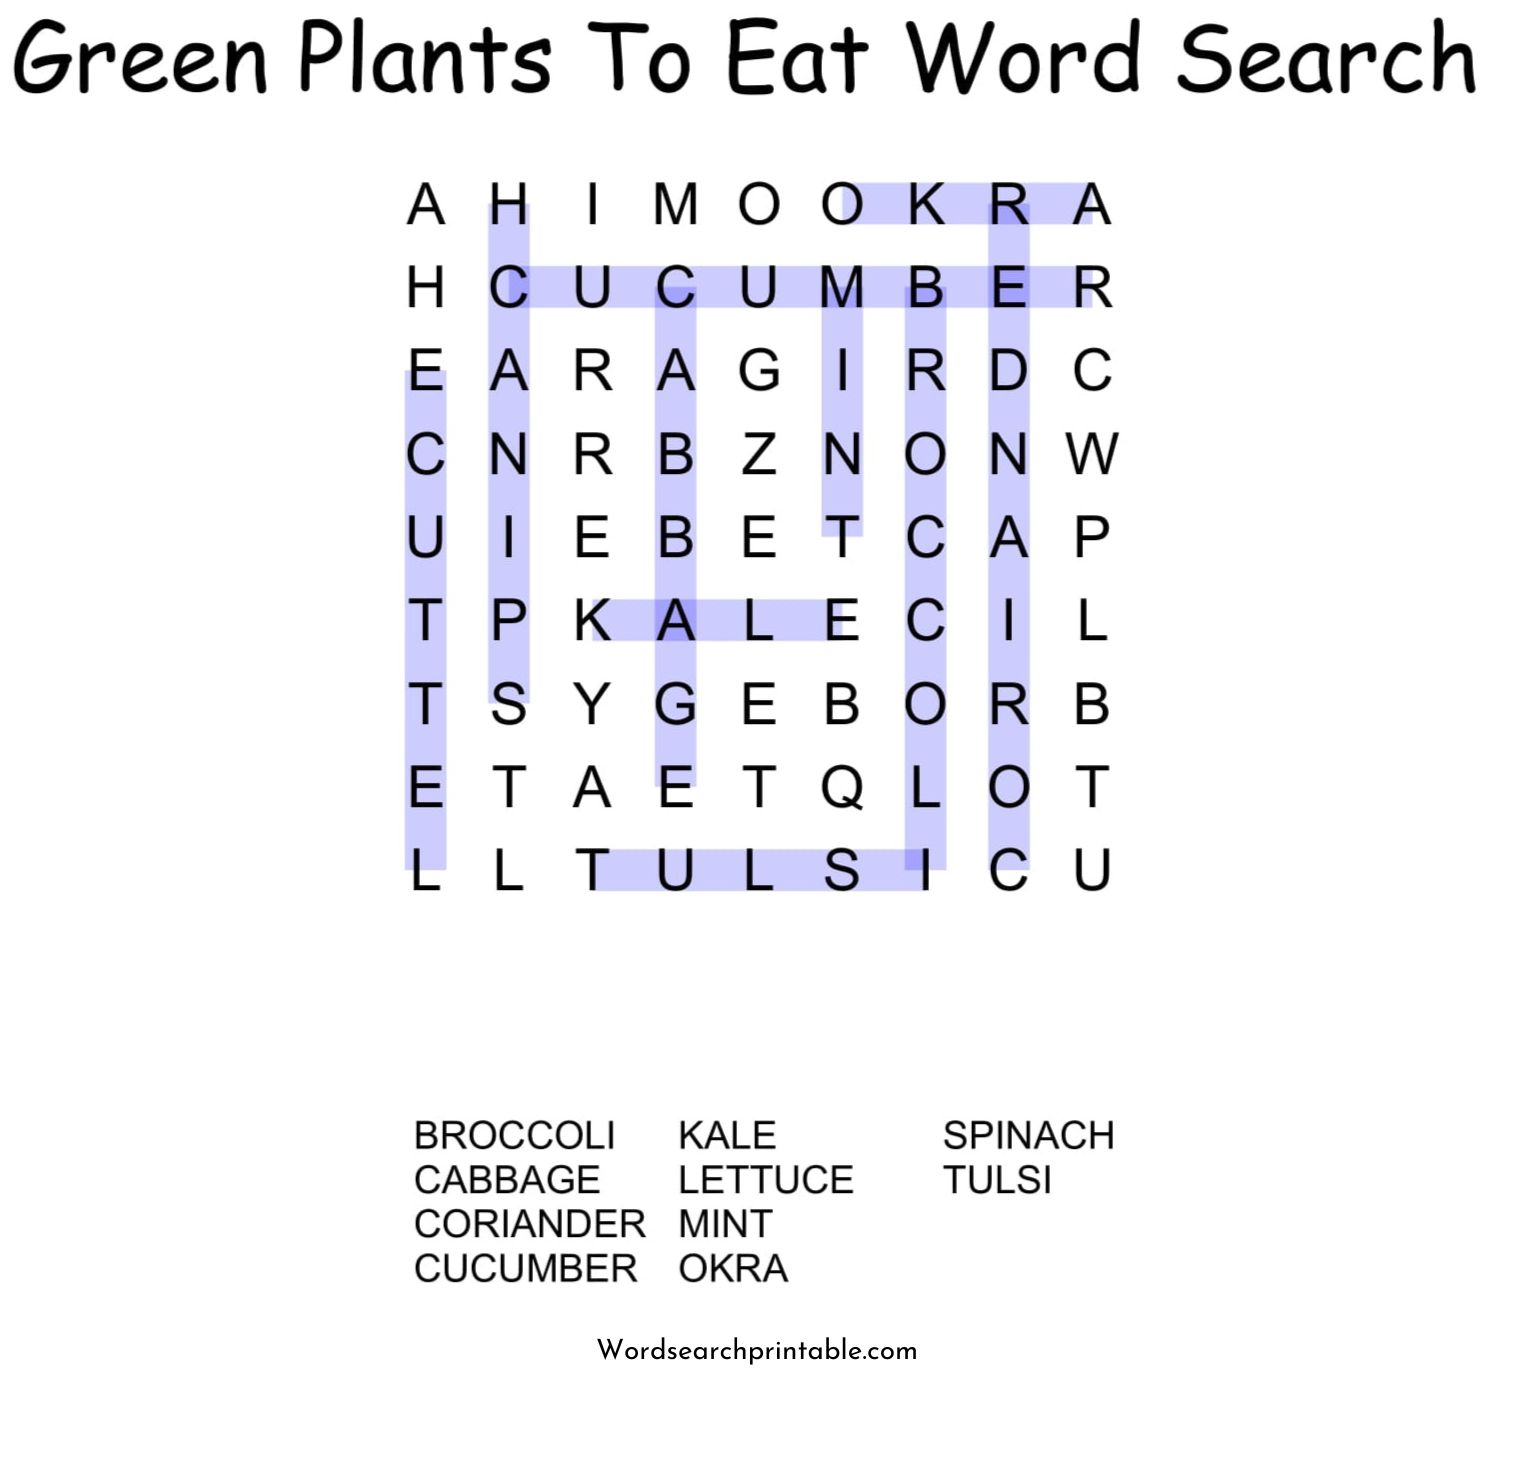 green plants to eat word search puzzle solution